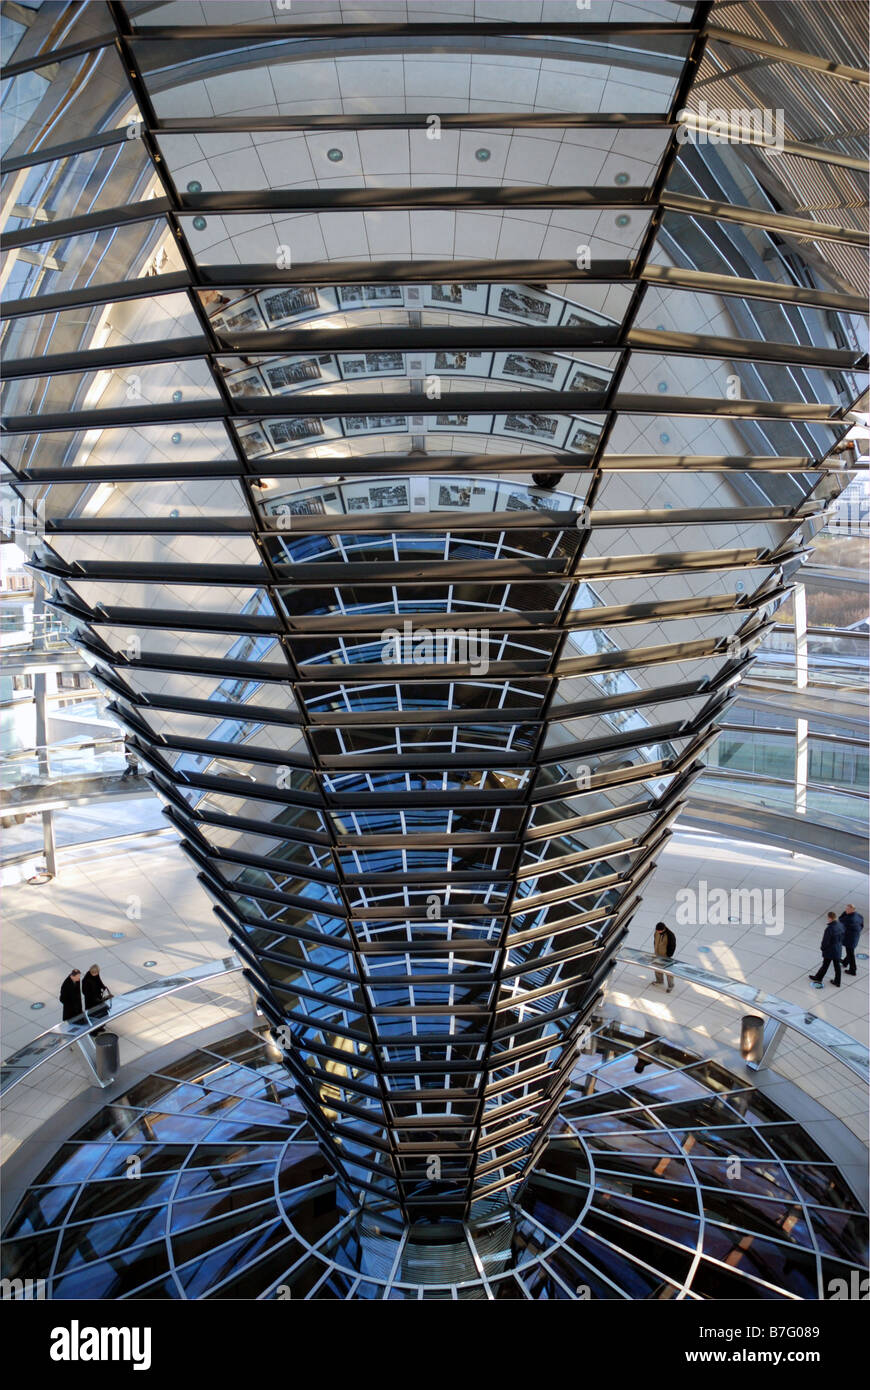 Inside Sir Norman Foster's glass Dome on top of the Reichstag building Stock Photo